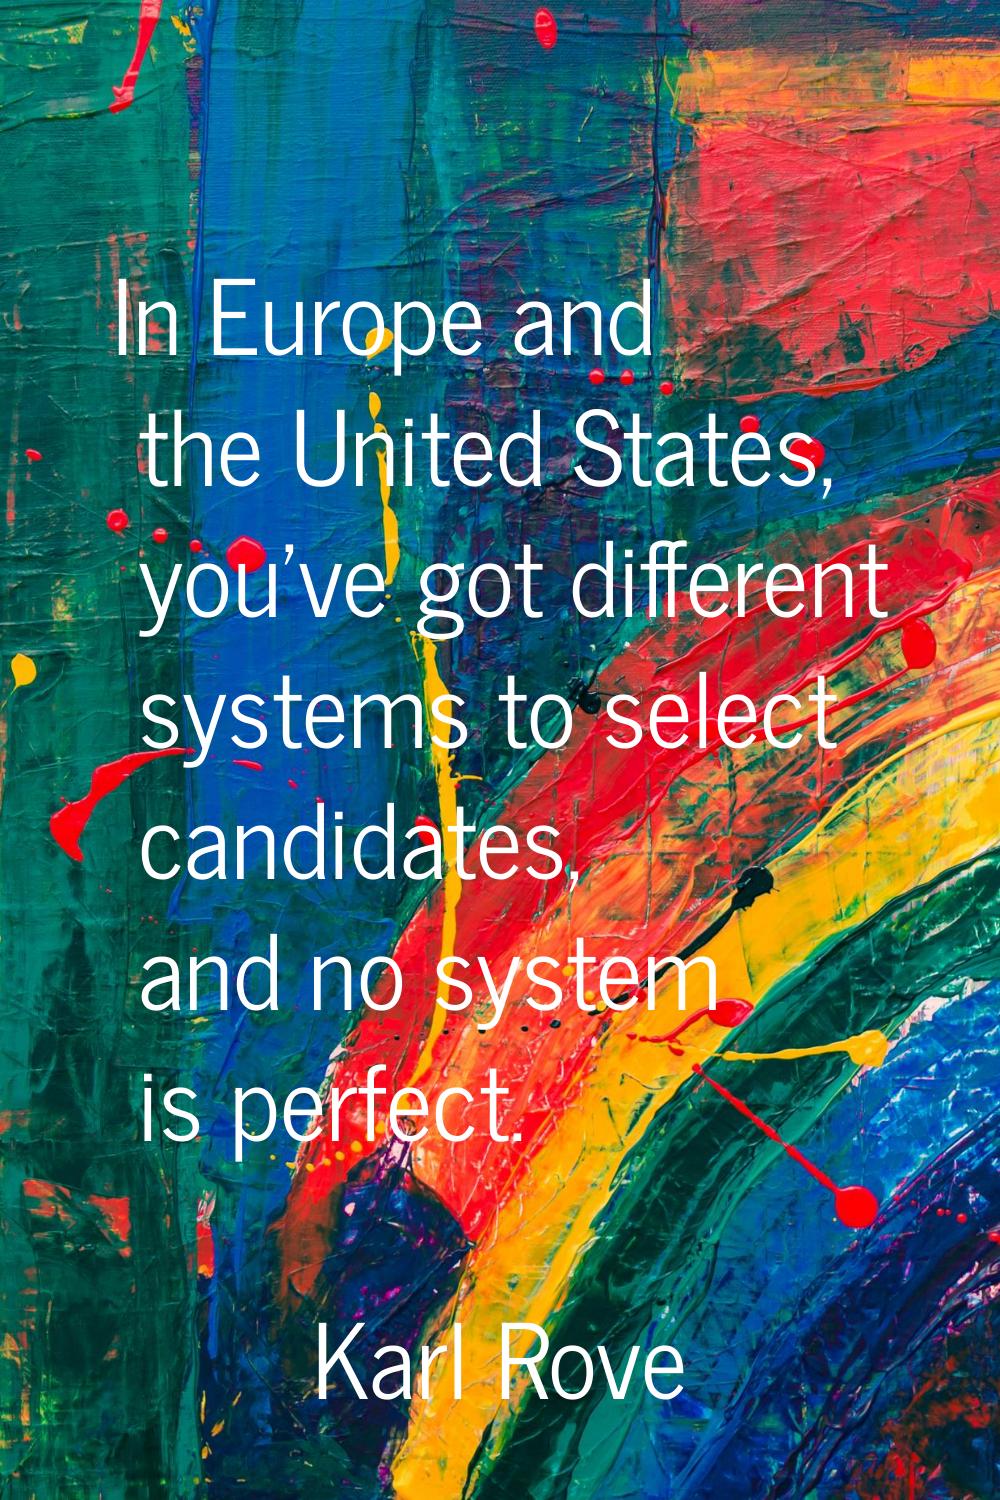 In Europe and the United States, you've got different systems to select candidates, and no system i